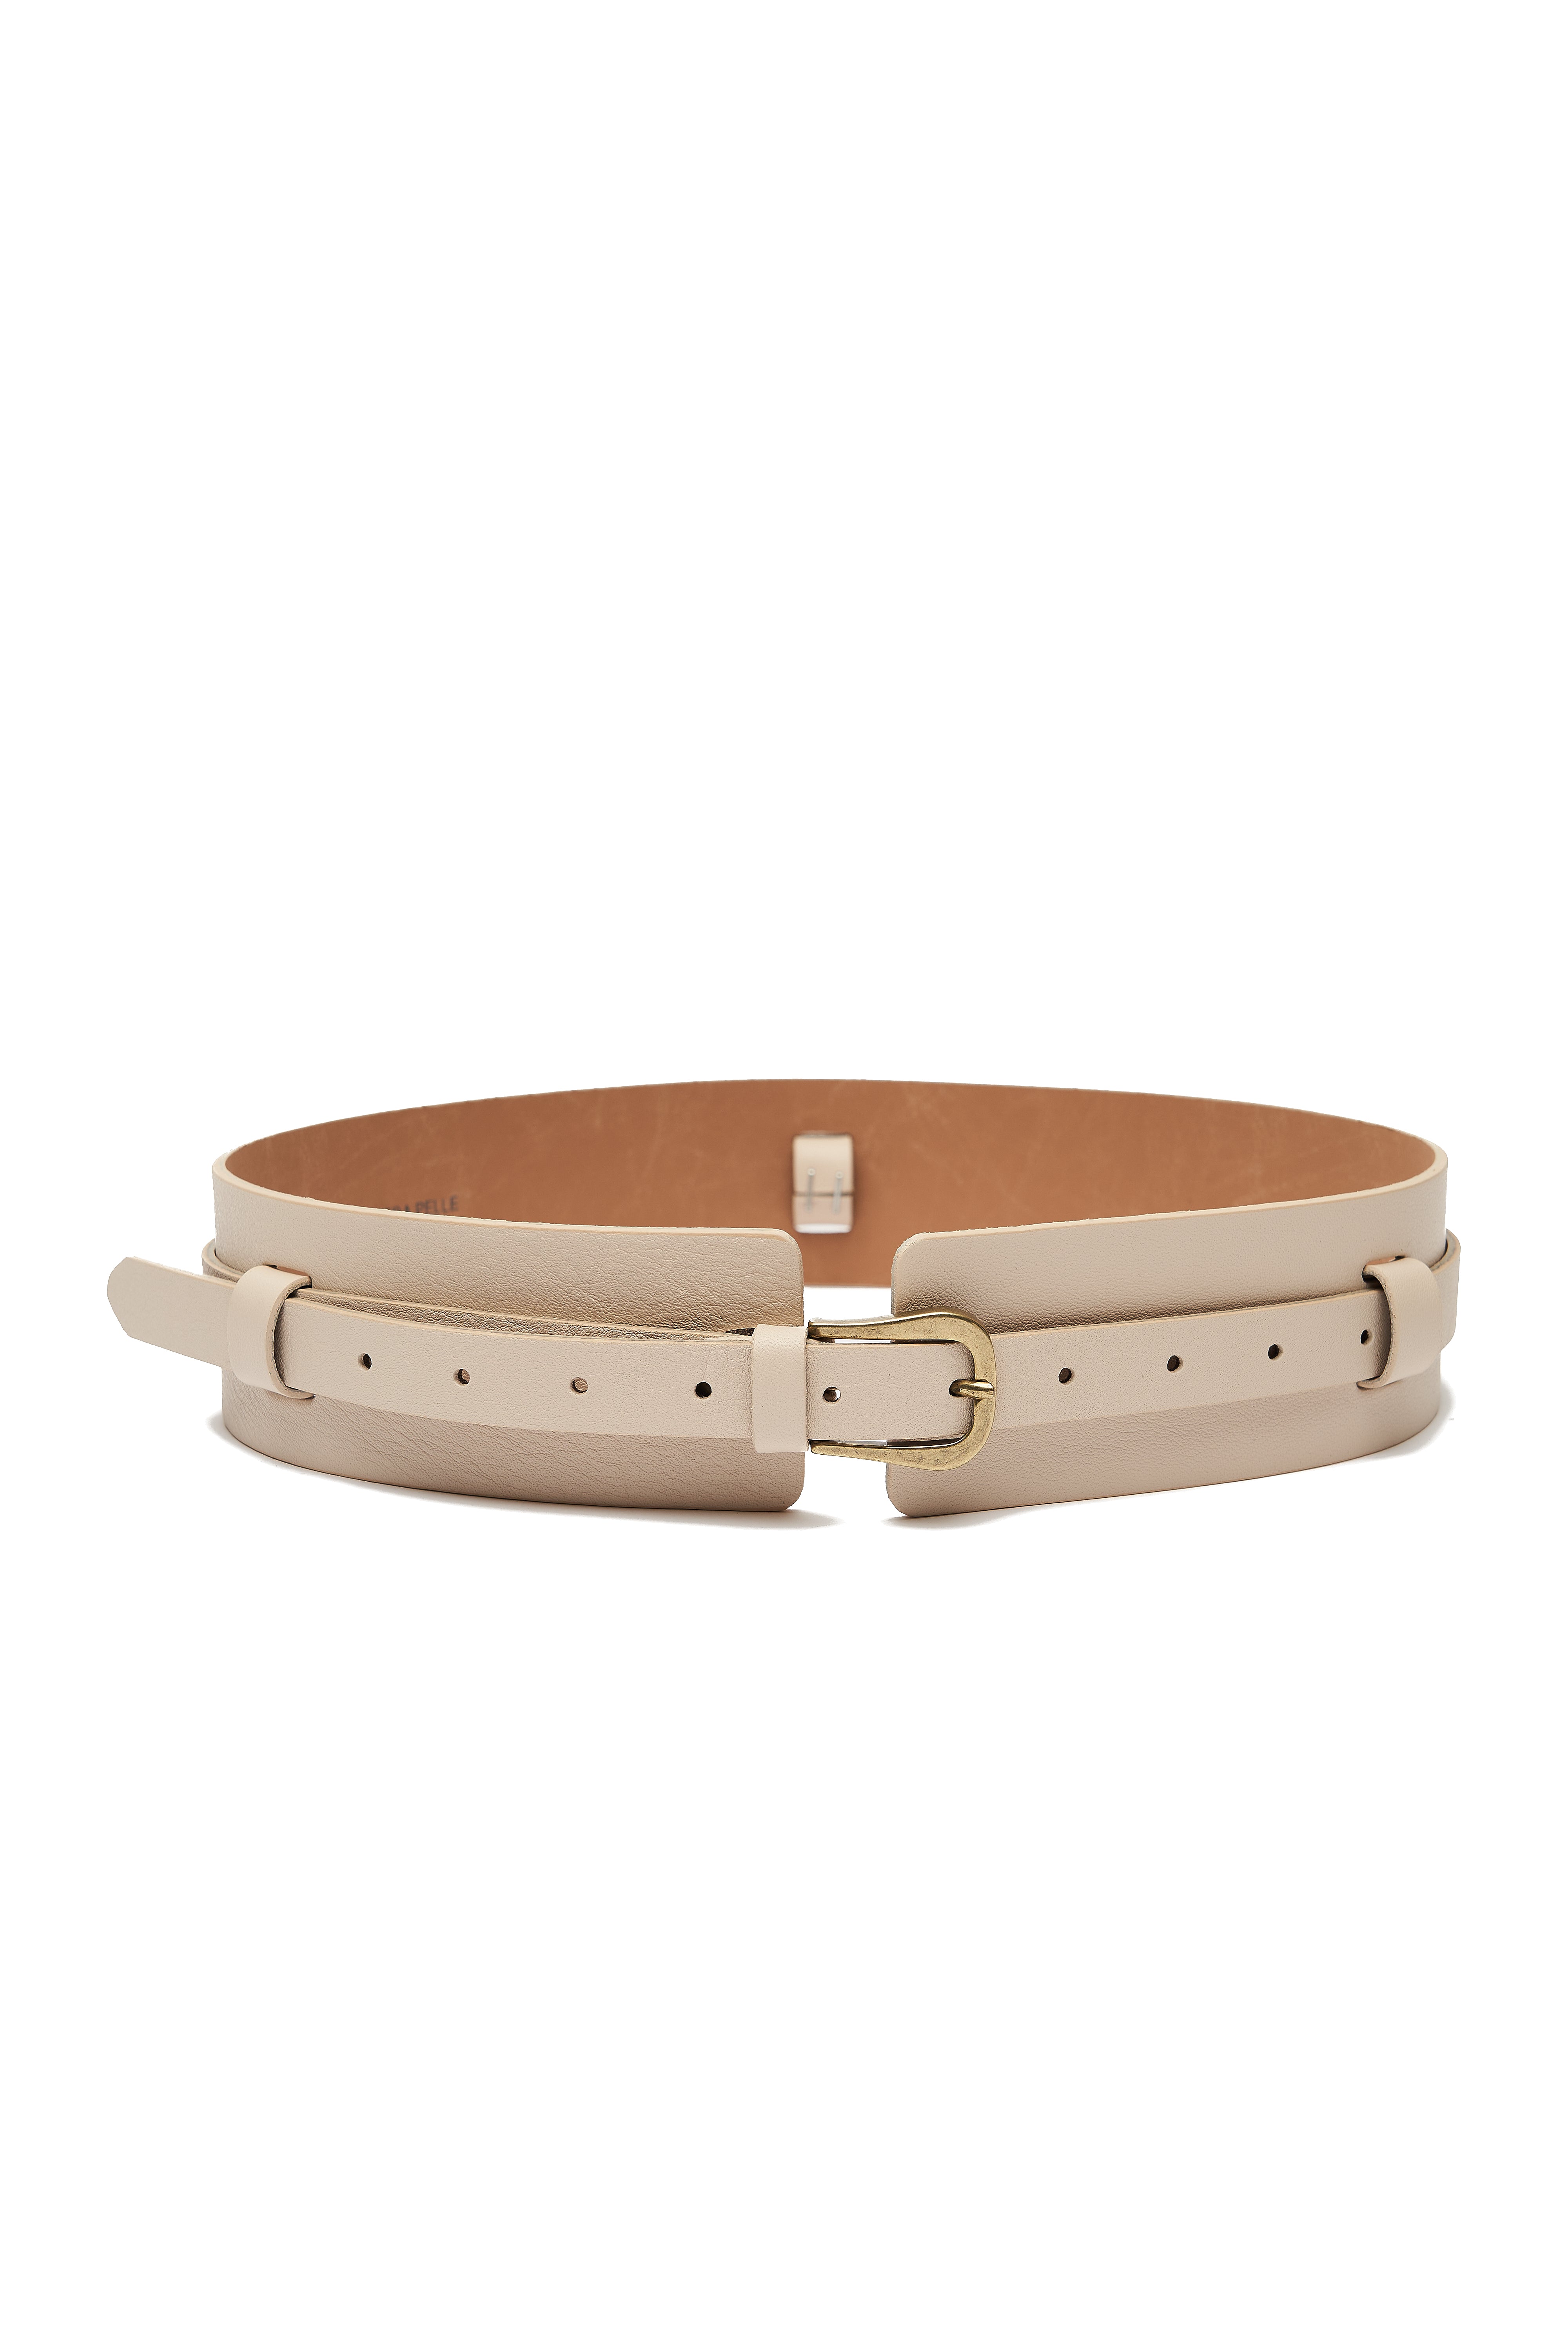 SAND-COLORED WIDE LEATHER BELT